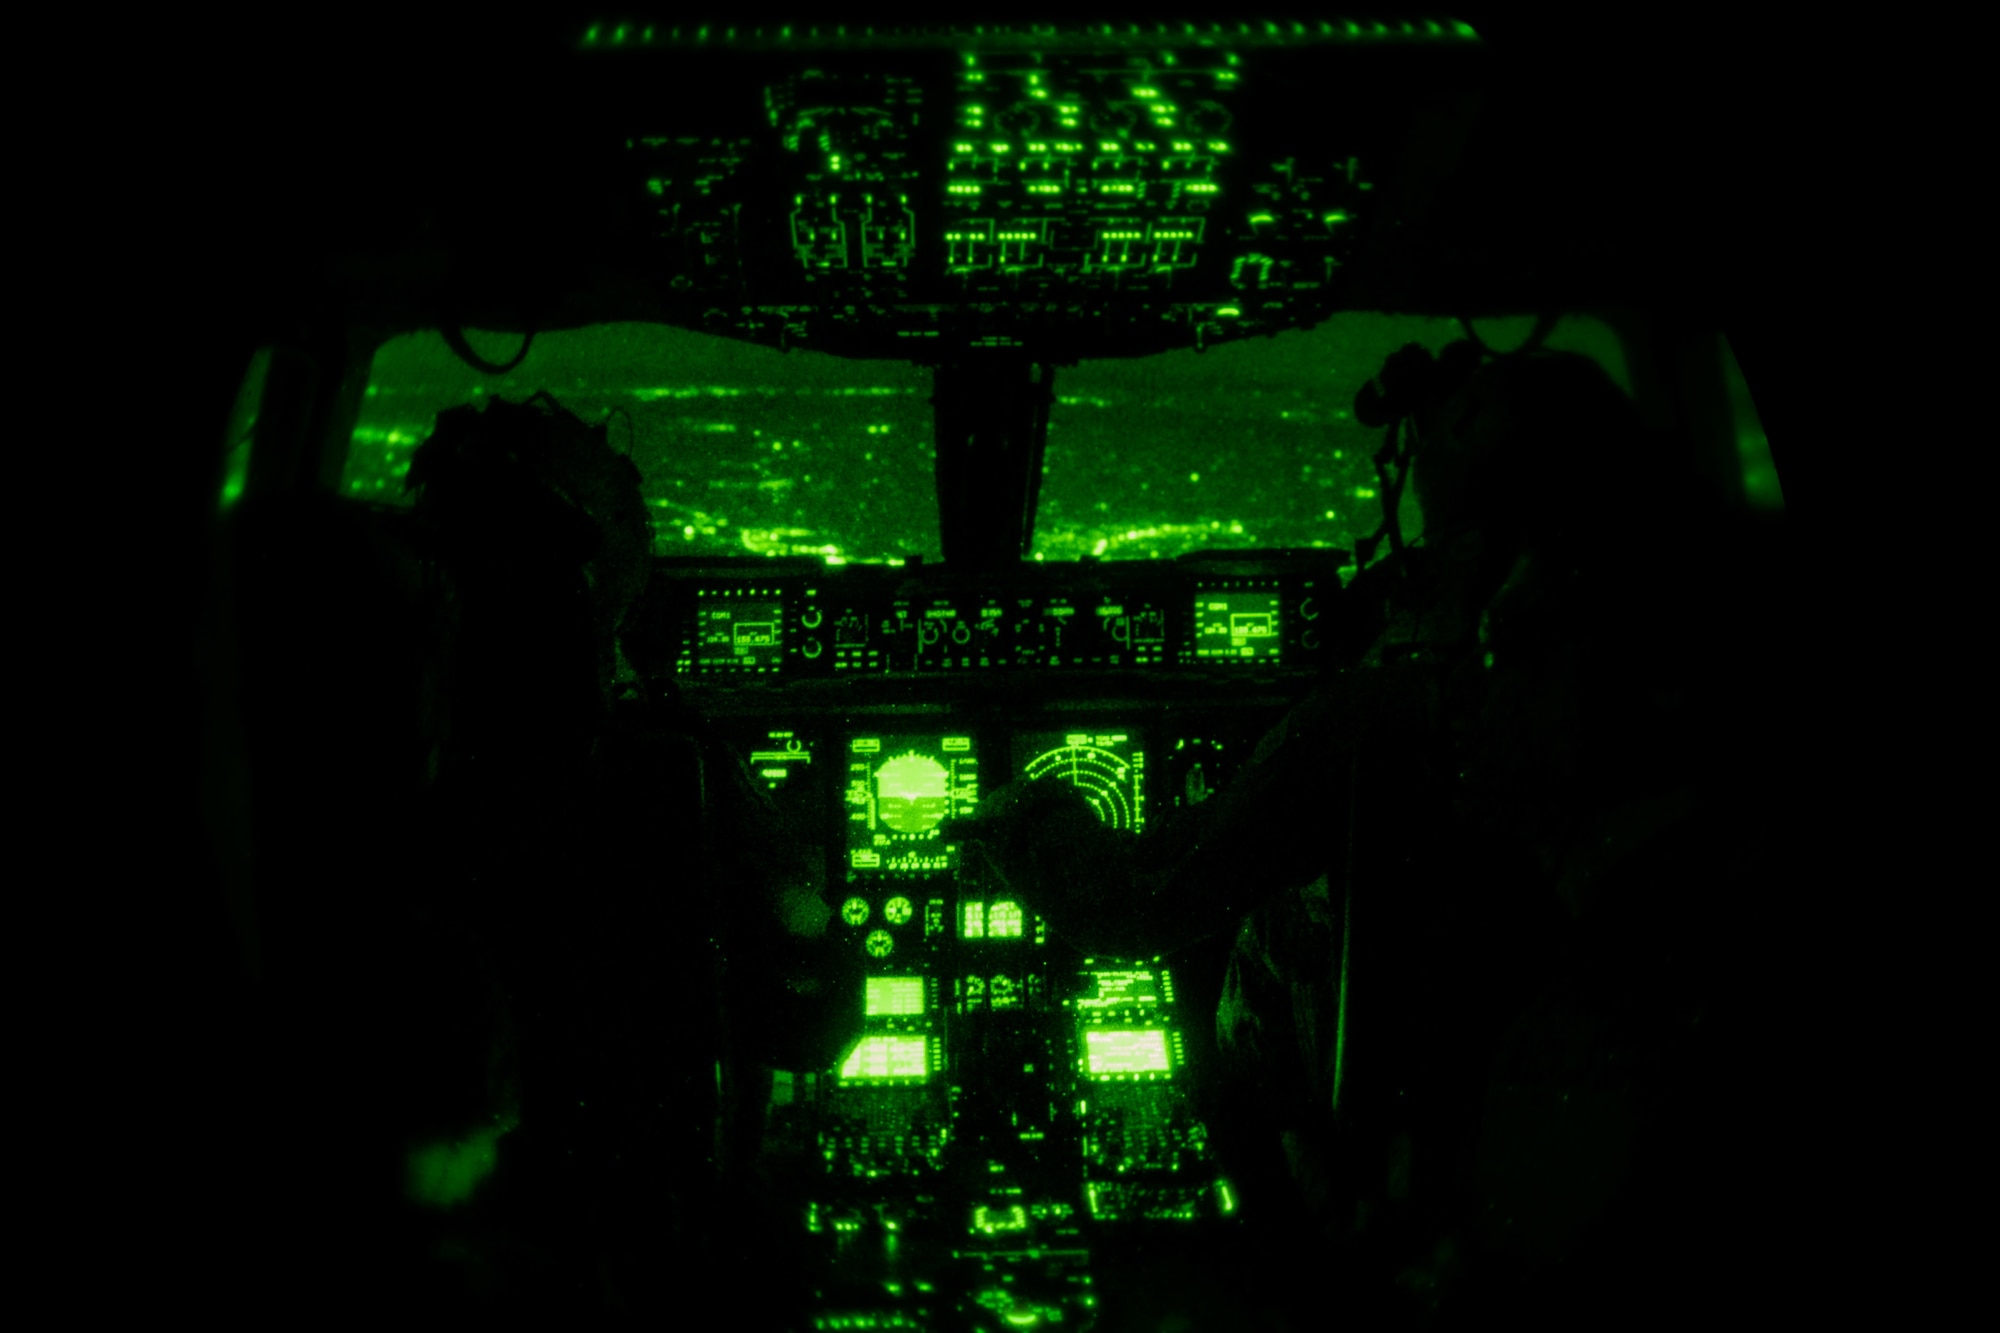 1st Lt. Zachary Pruitt, 3rd Airlift Squadron pilot, and Capt. Corey Landis, 3rd AS instructor pilot, fly a C-17 Globemaster III over Pennsylvania, while wearing night vision goggles, Jan. 28, 2021. In combat, flying at night without artificial light minimizes visibility of the aircraft and reduces threat from potential enemies. The 3rd AS routinely trains to support global engagement through direct delivery of time-critical theater deployment assets and ensure aircrew operational readiness. (U.S. Air Force photo by Airman 1st Class Faith Schaefer)